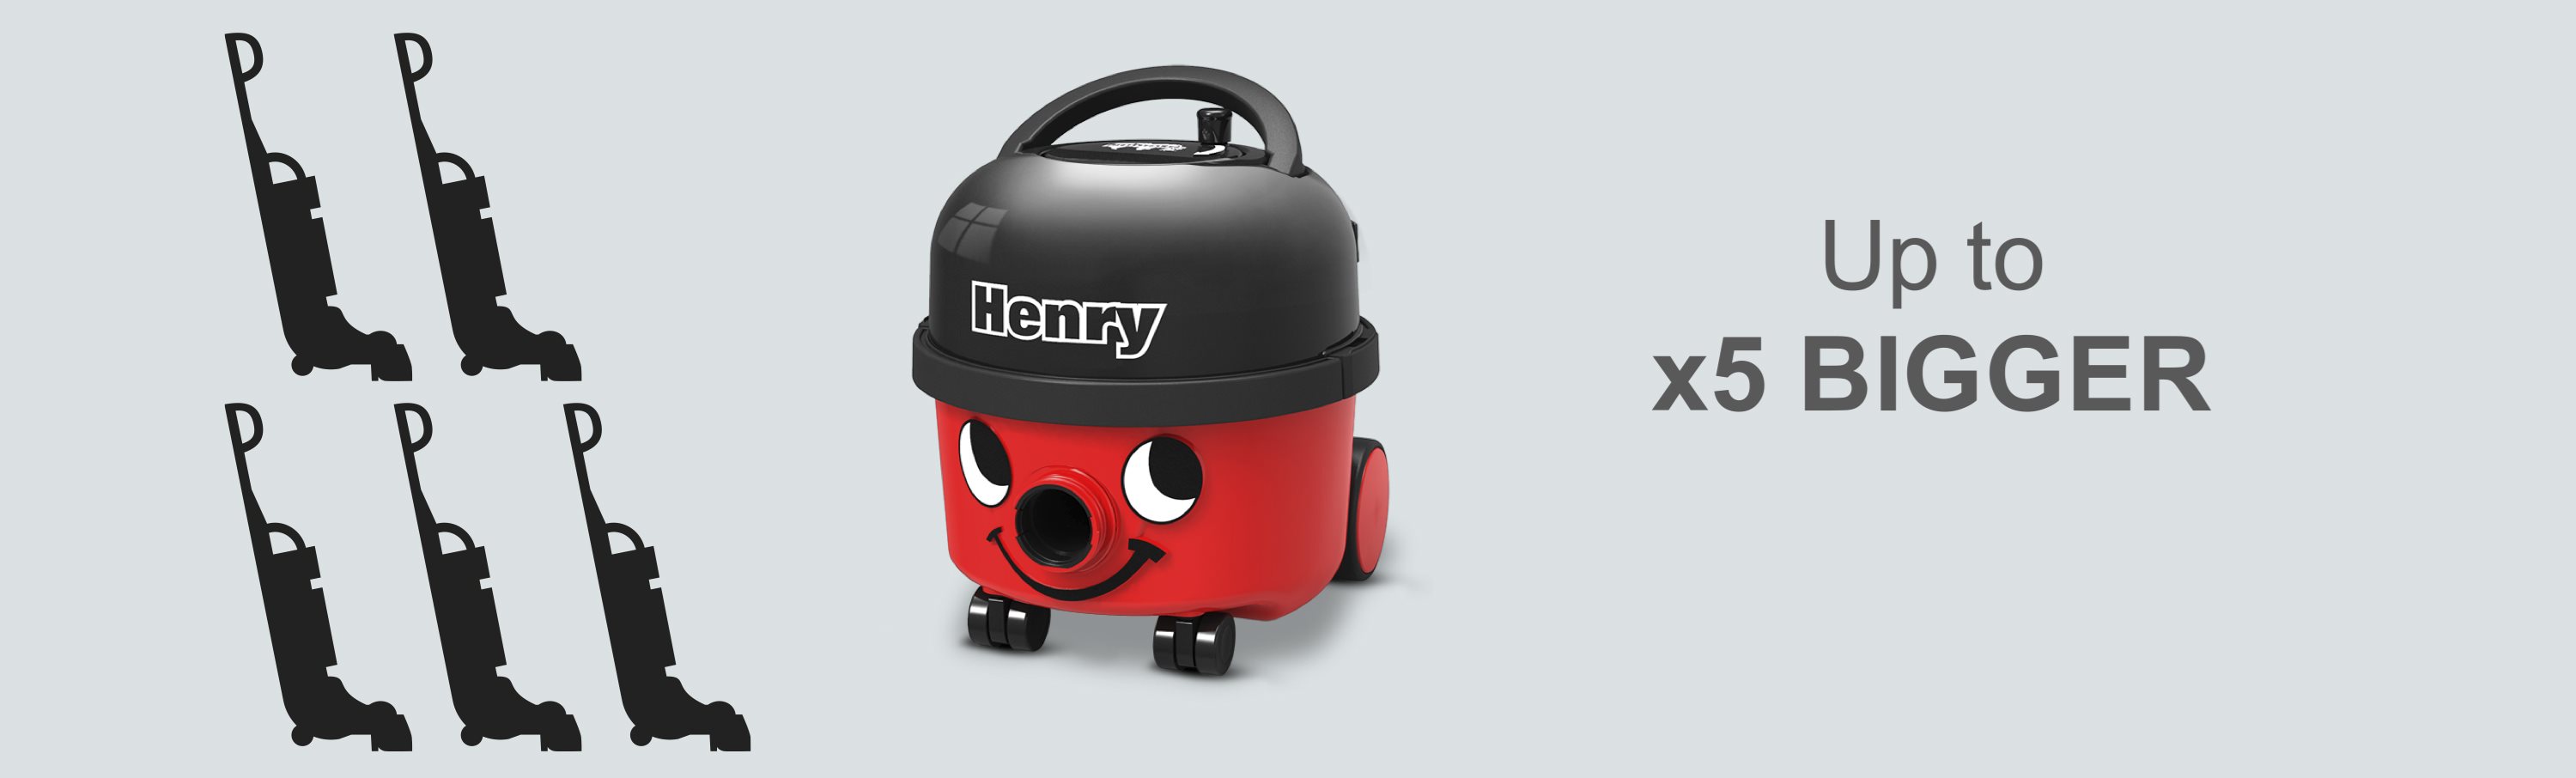 Buy Henry Bagged Corded Cylinder Vacuum Cleaner - Red